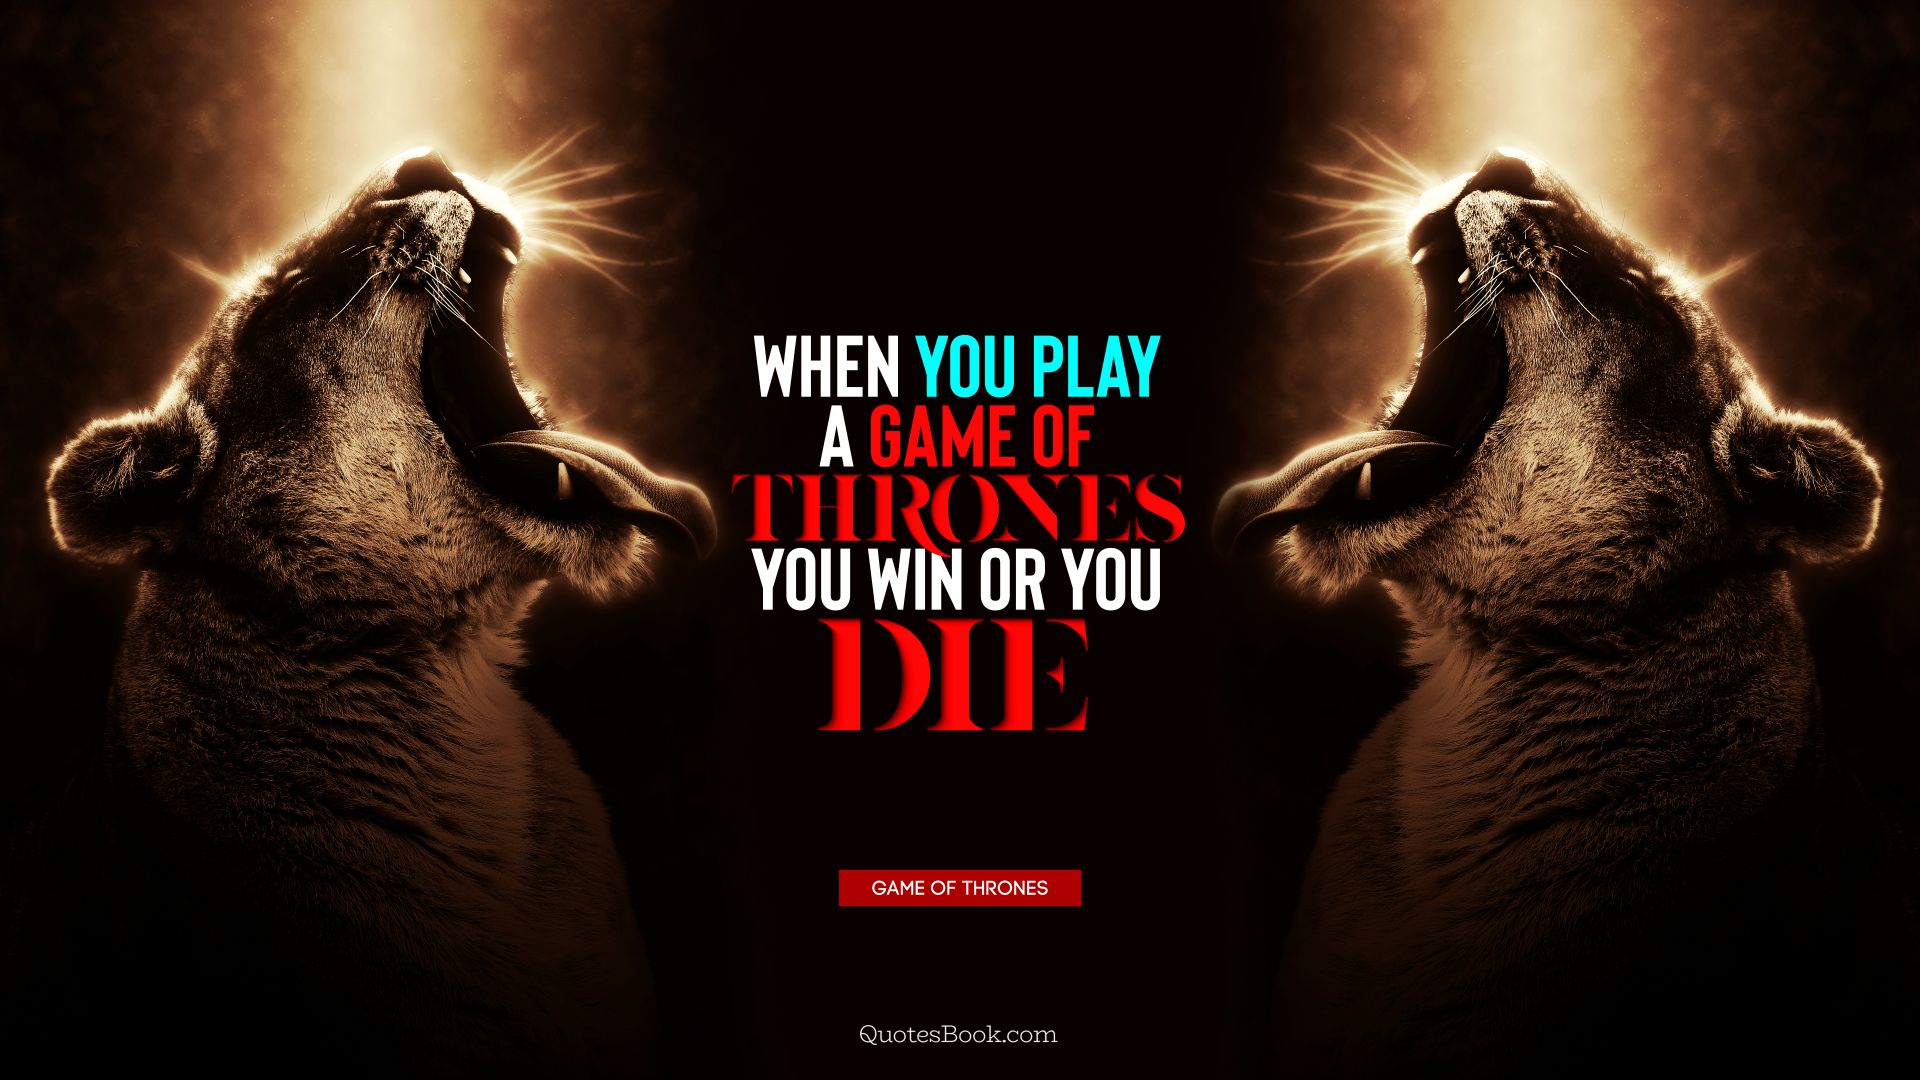 When you play a game of thrones you win or you die. - Quote by George R.R. Martin